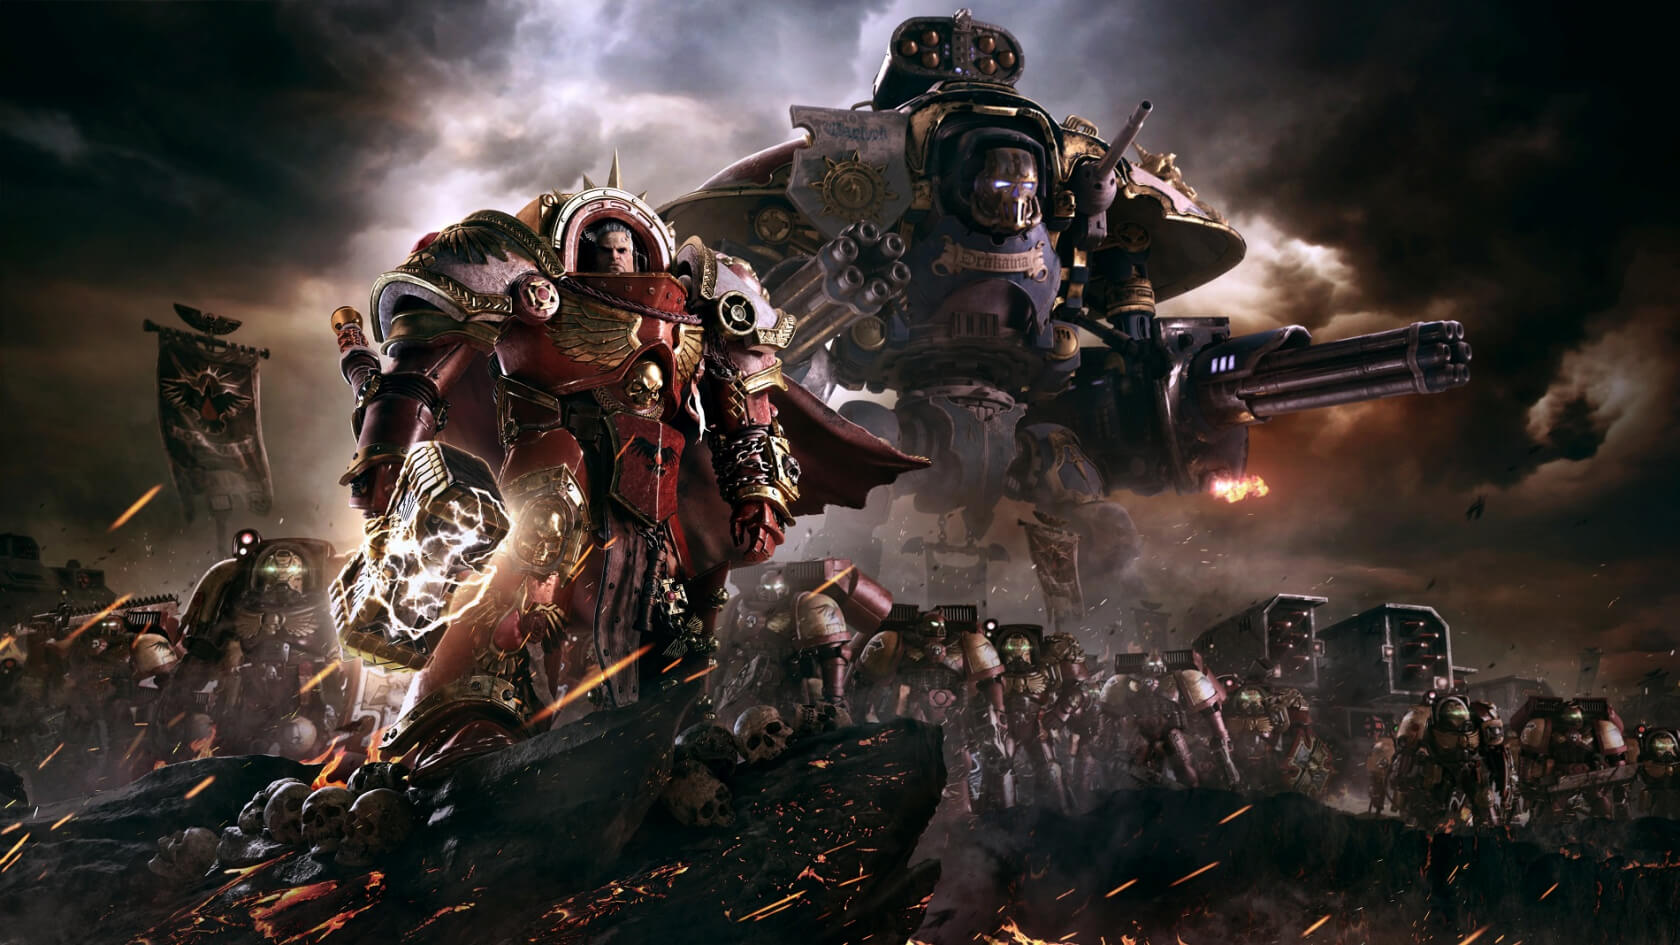 Relic ceases ongoing development of Dawn of War III due to poor sales